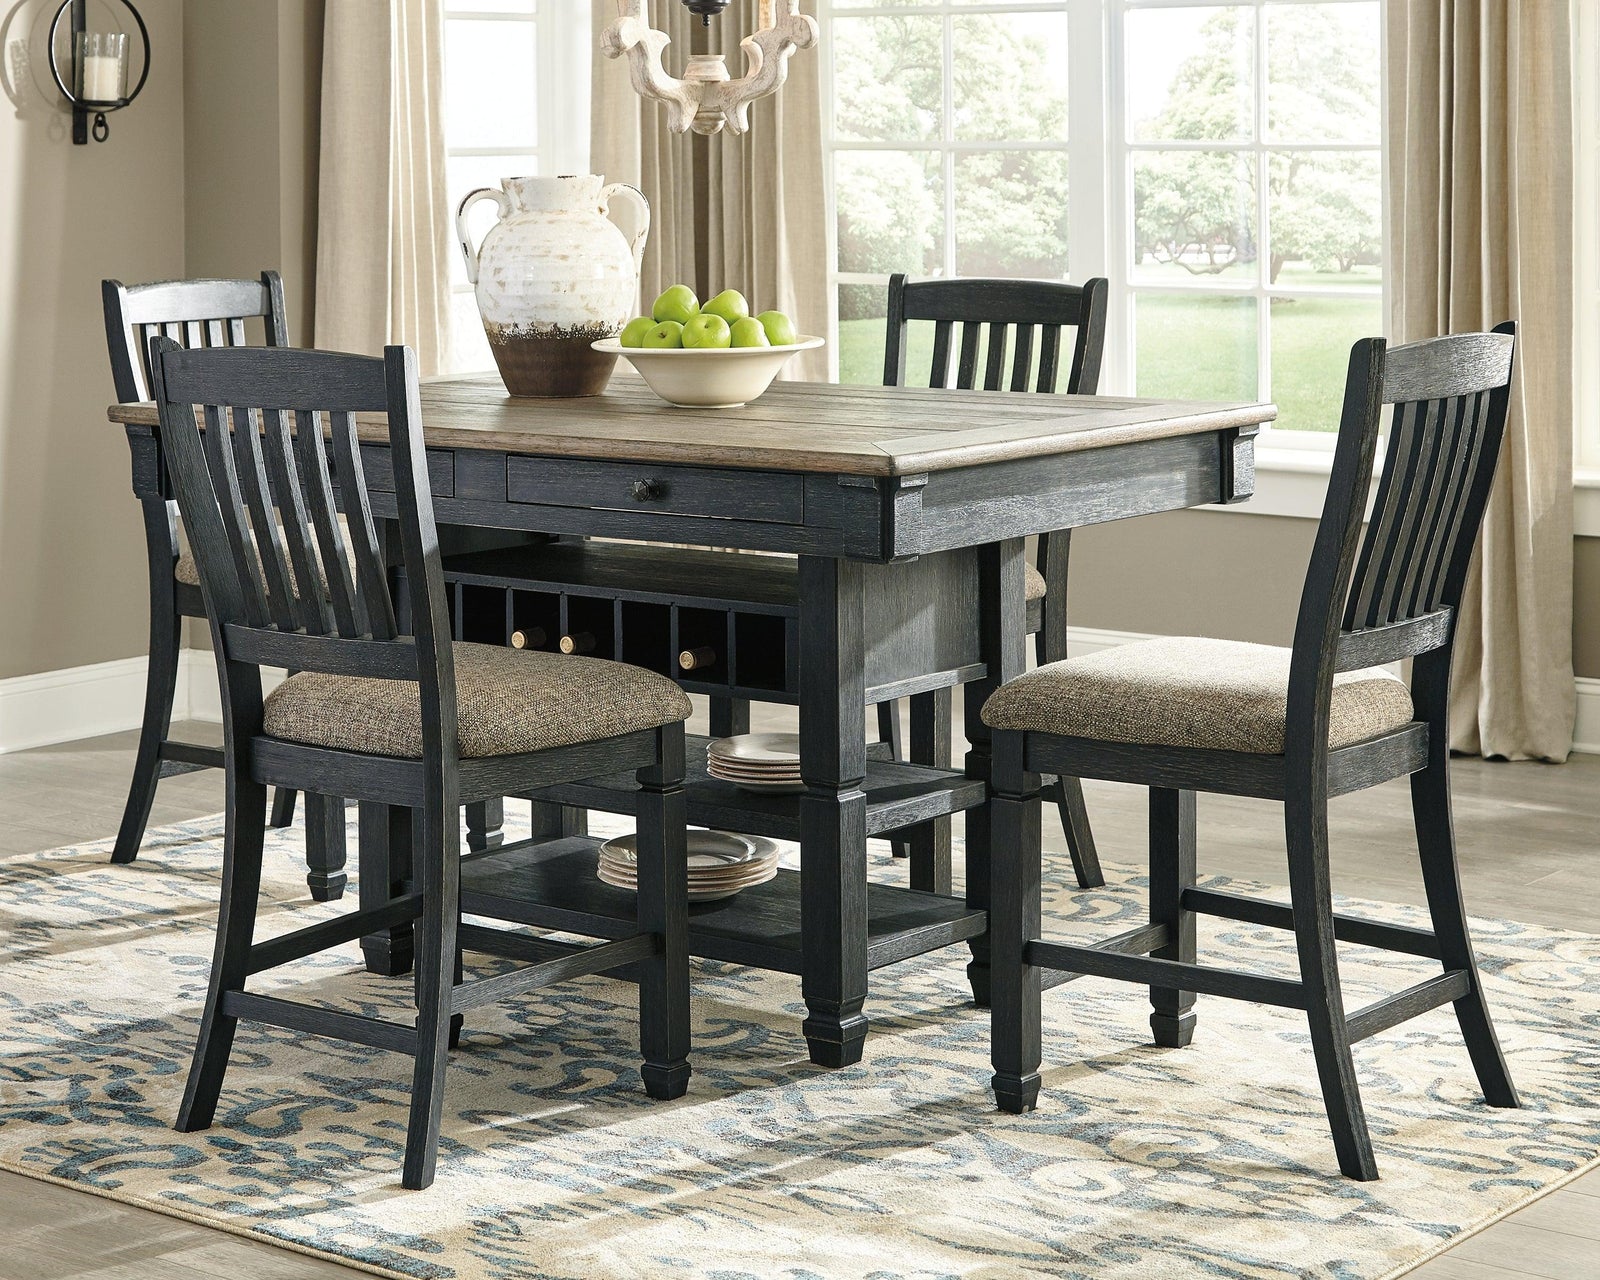 Tyler Black/gray Creek Counter Height Dining Table And 4 Barstools - Ella Furniture